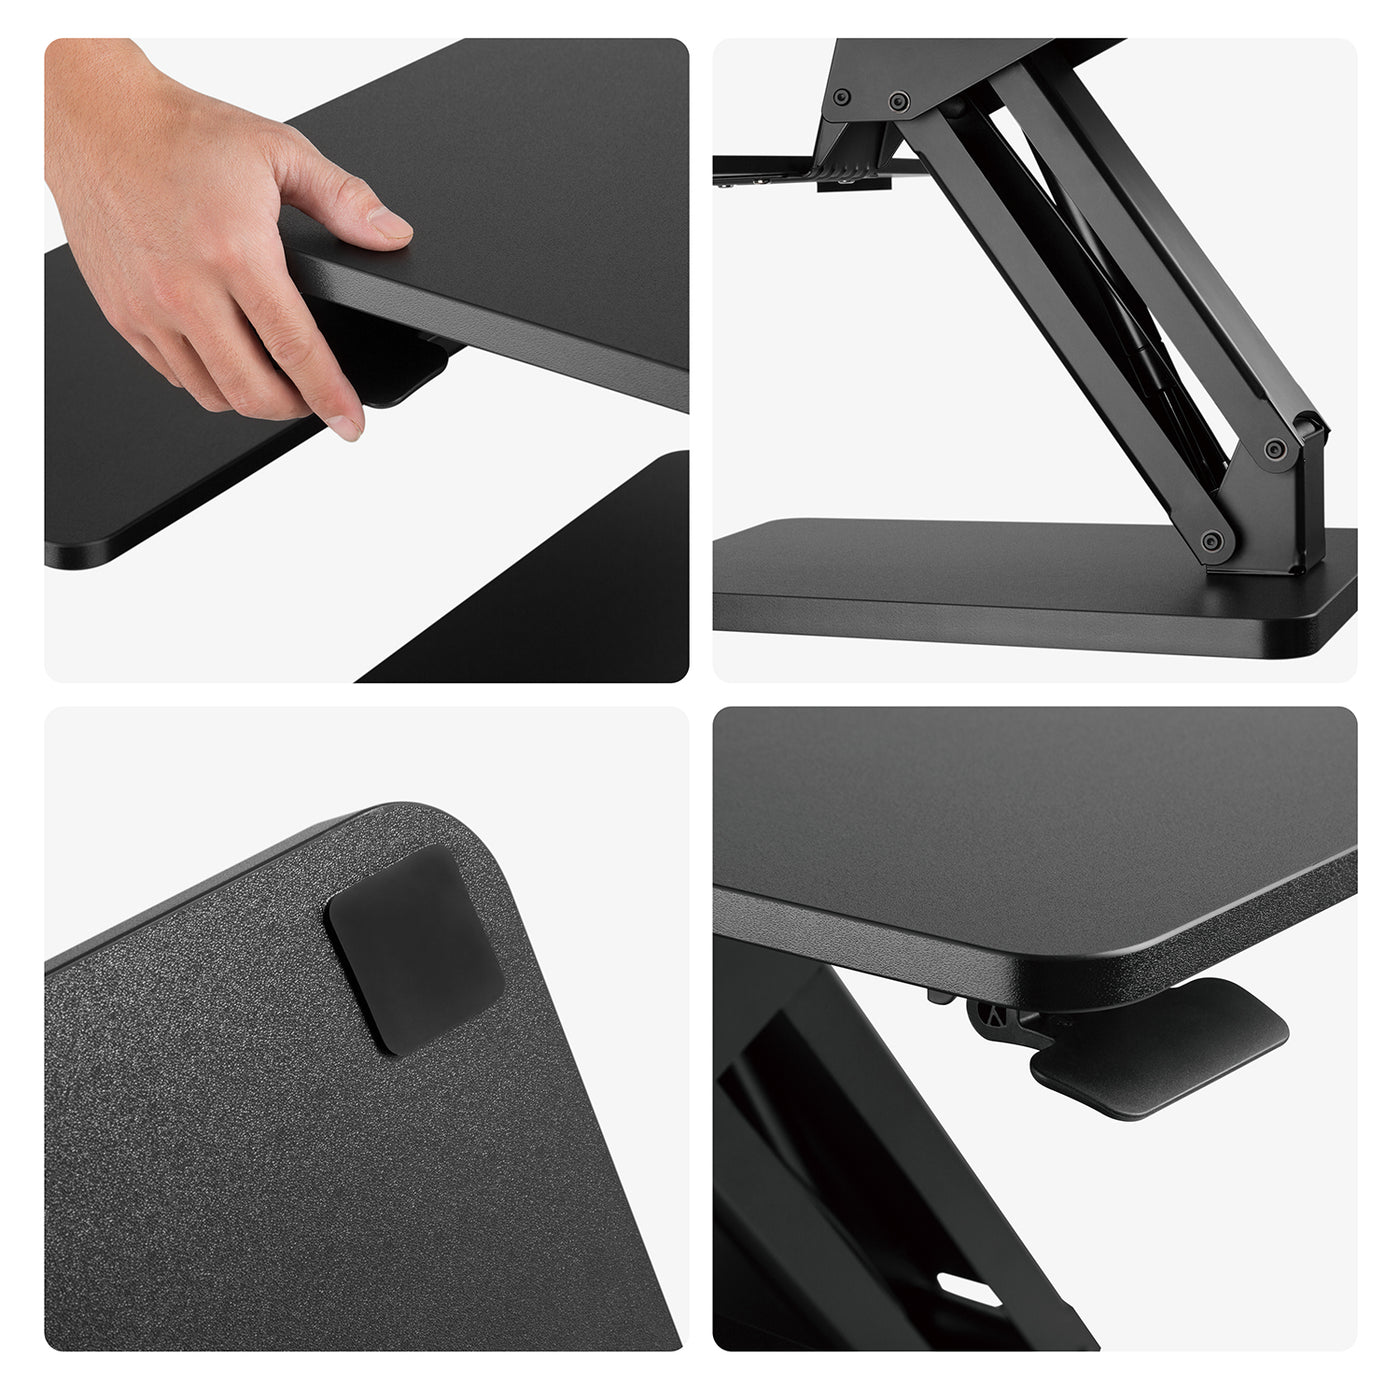 Maclean MC-882 Desk Stand for Laptop, Monitor, Keyboard, Mouse, for Sitting and Standing Work Position Ergonomic Stand